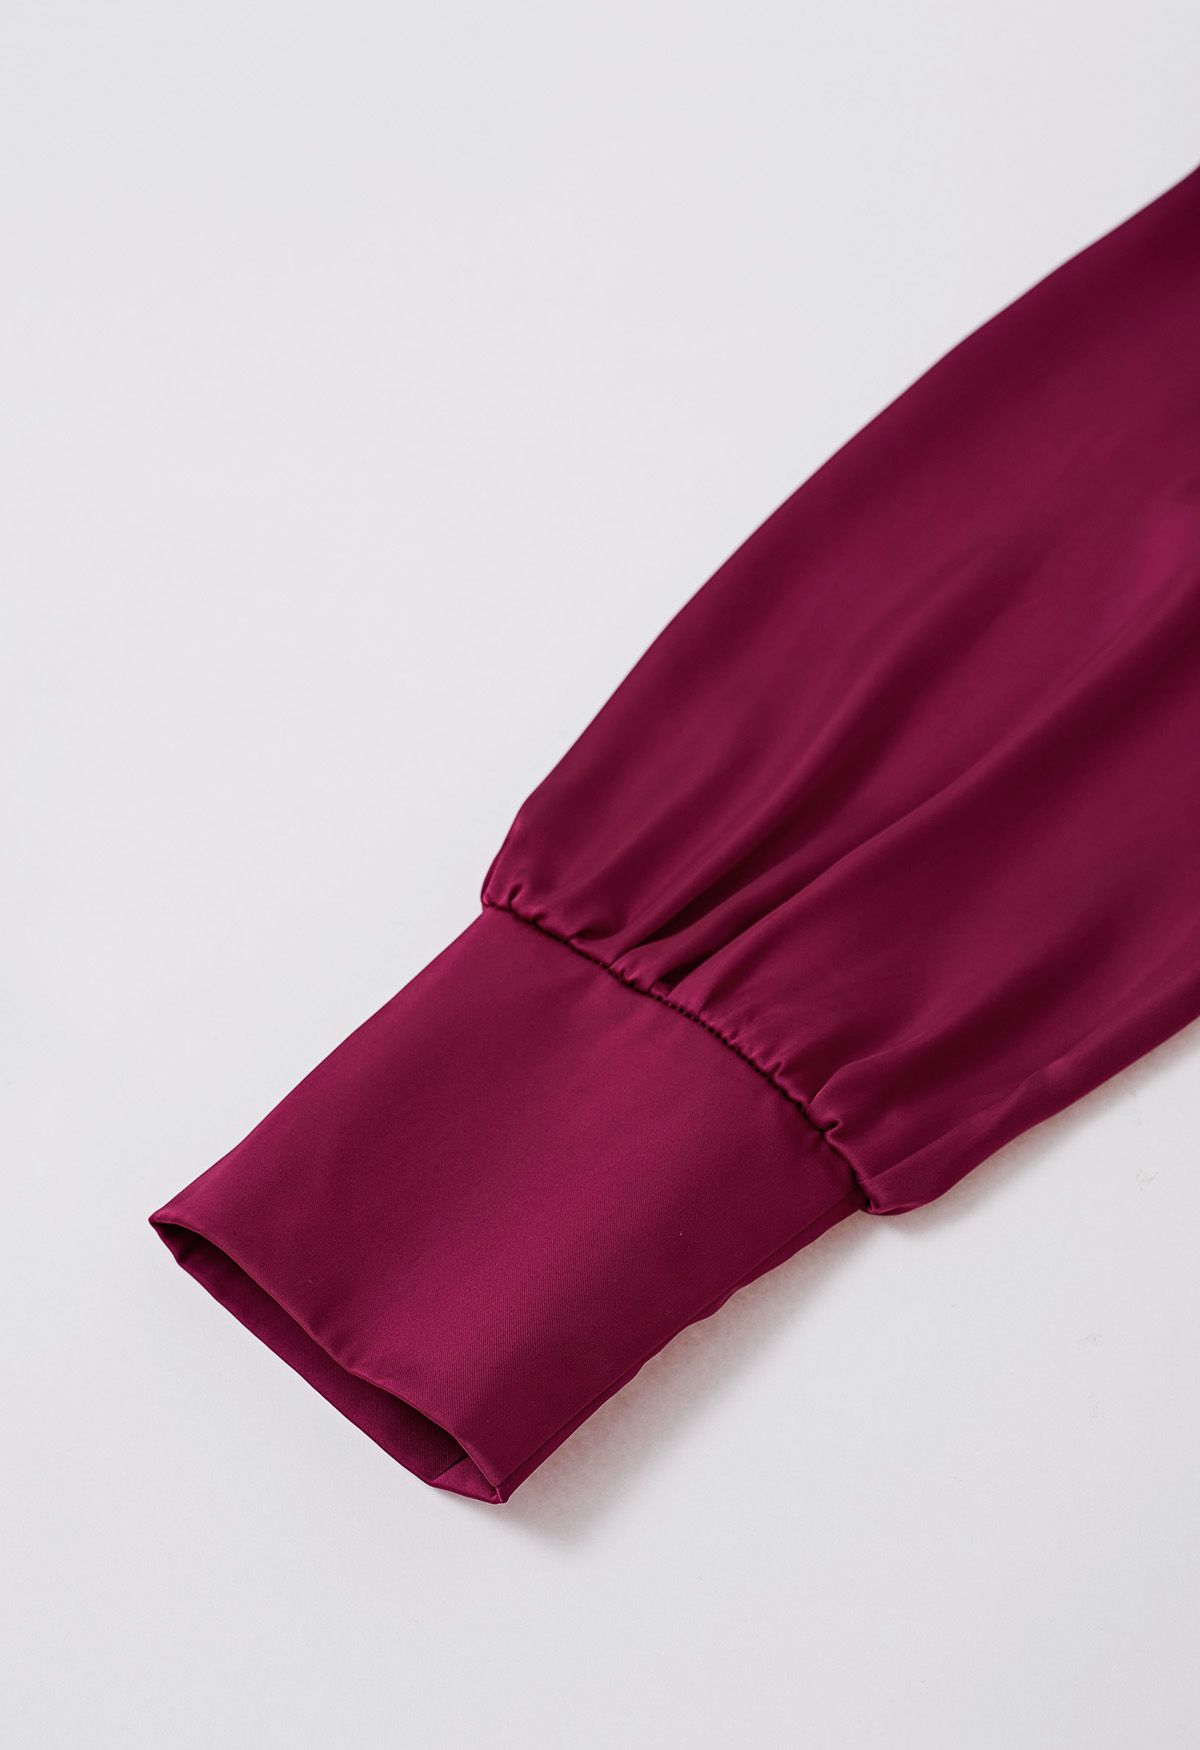 Shine Bright High Neck Tulle Maxi Dress in Burgundy - Retro, Indie and ...